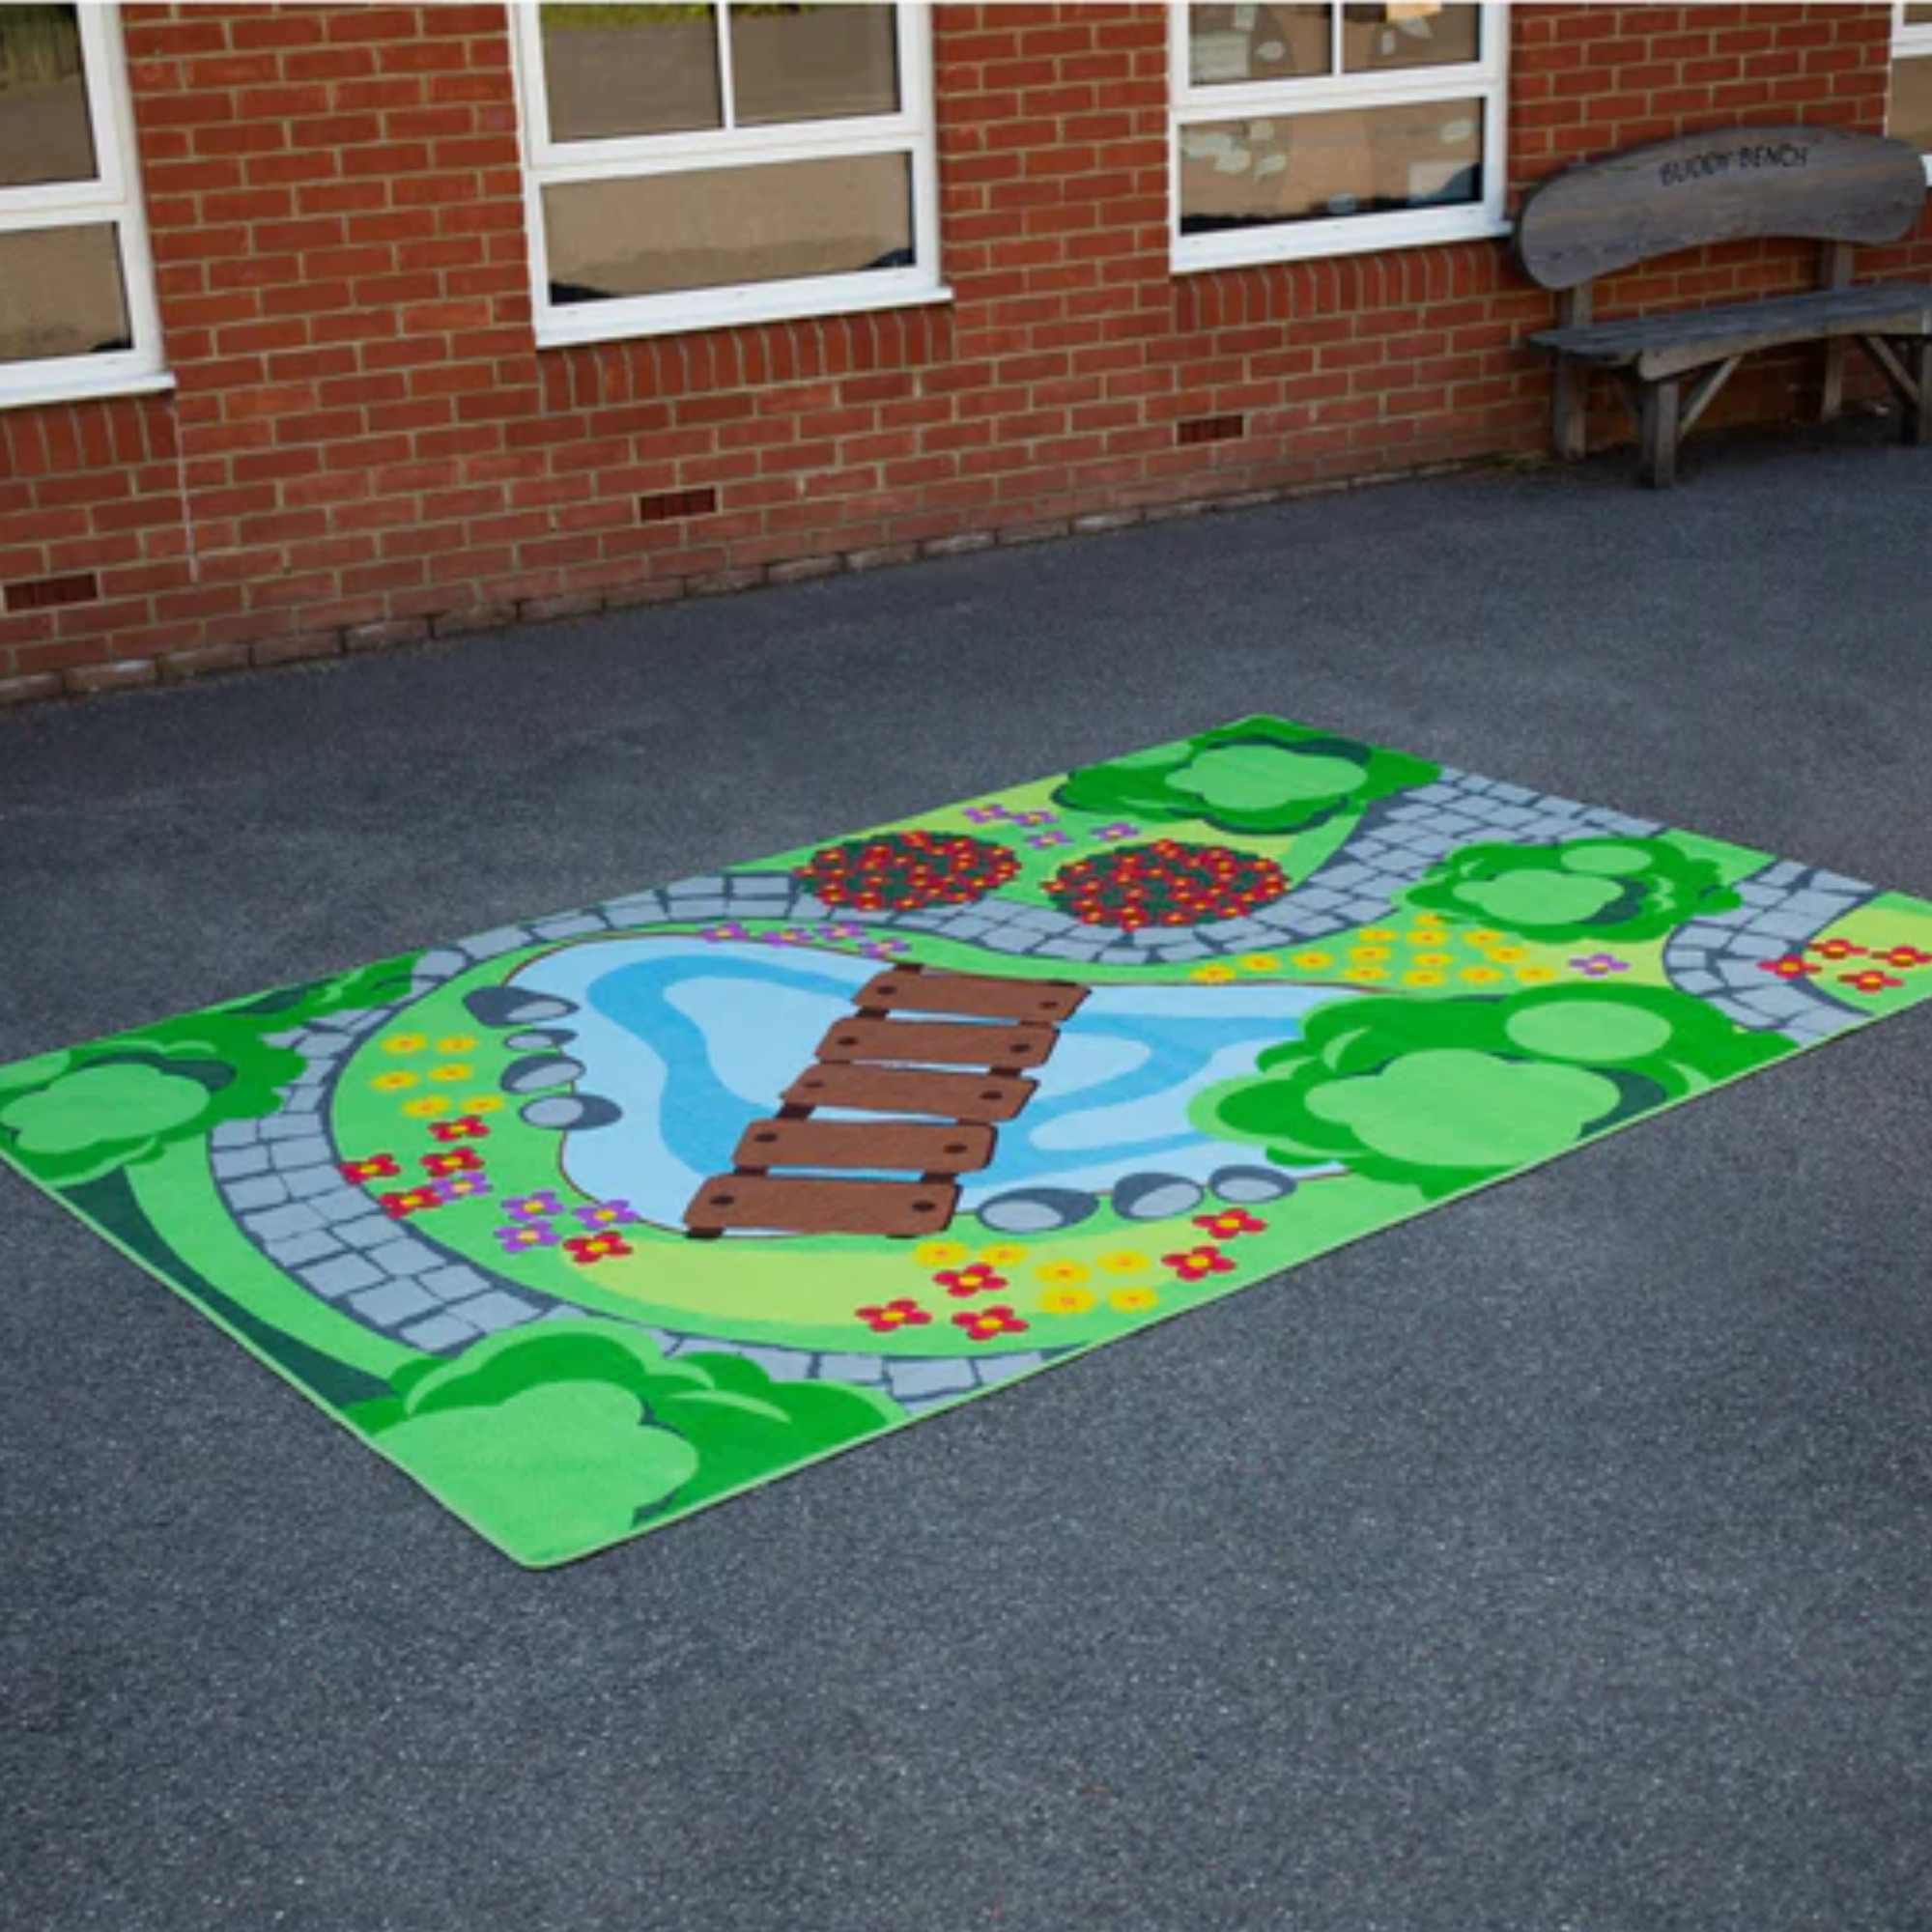 Back to Nature Garden Outdoor Mat, The Back to Nature Garden Outdoor Mat is a delightful addition to outdoor learning environments. The Back to Nature Garden Outdoor Mat is crease resistant with unique Rhombus anti-skid Dura-Latex safety backing.Features of the Back to Nature Garden Outdoor Mat The Back to Nature Garden Outdoor Mat is a decorative mat with pathways to encourage active and imaginative play. The Back to Nature Garden Outdoor Mat supports outdoor learning which will help children connect with 